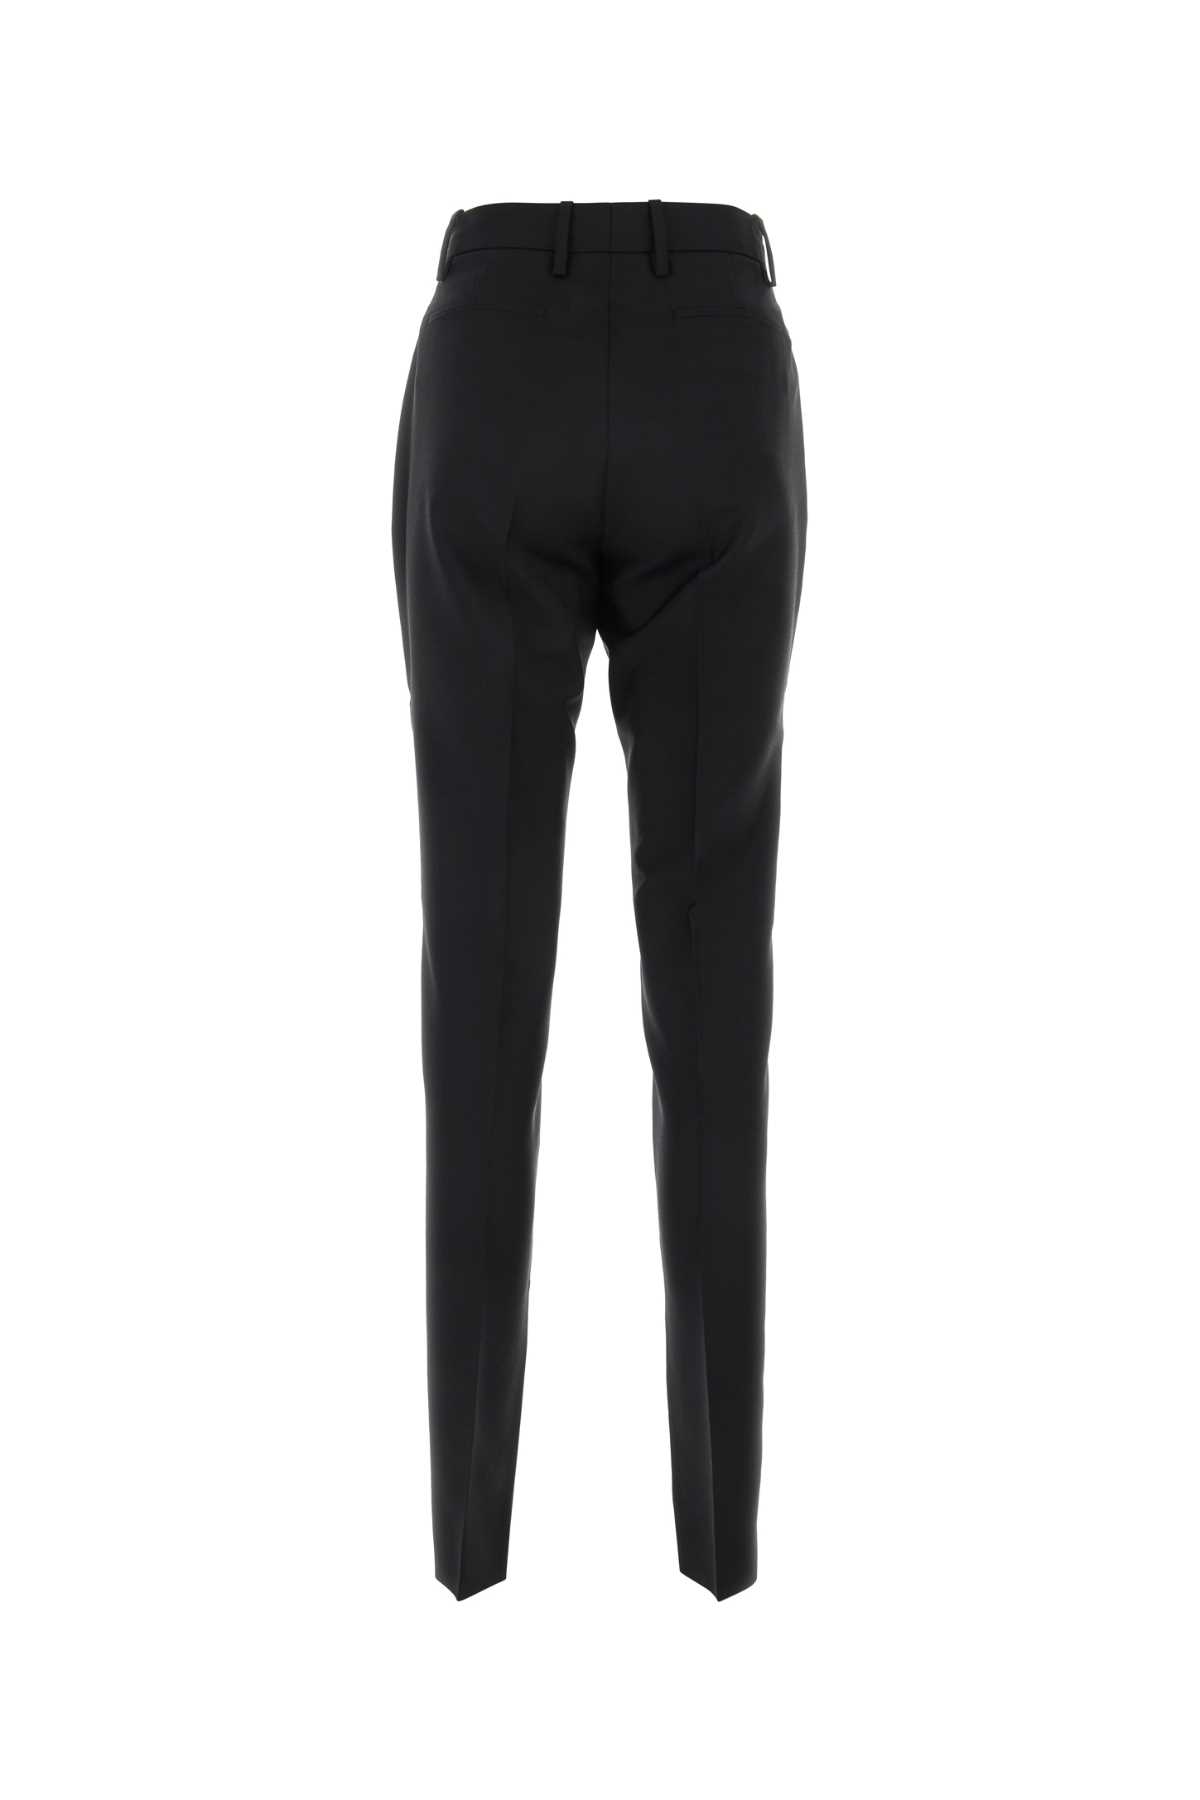 Shop Gucci Black Twill Pant In 1000